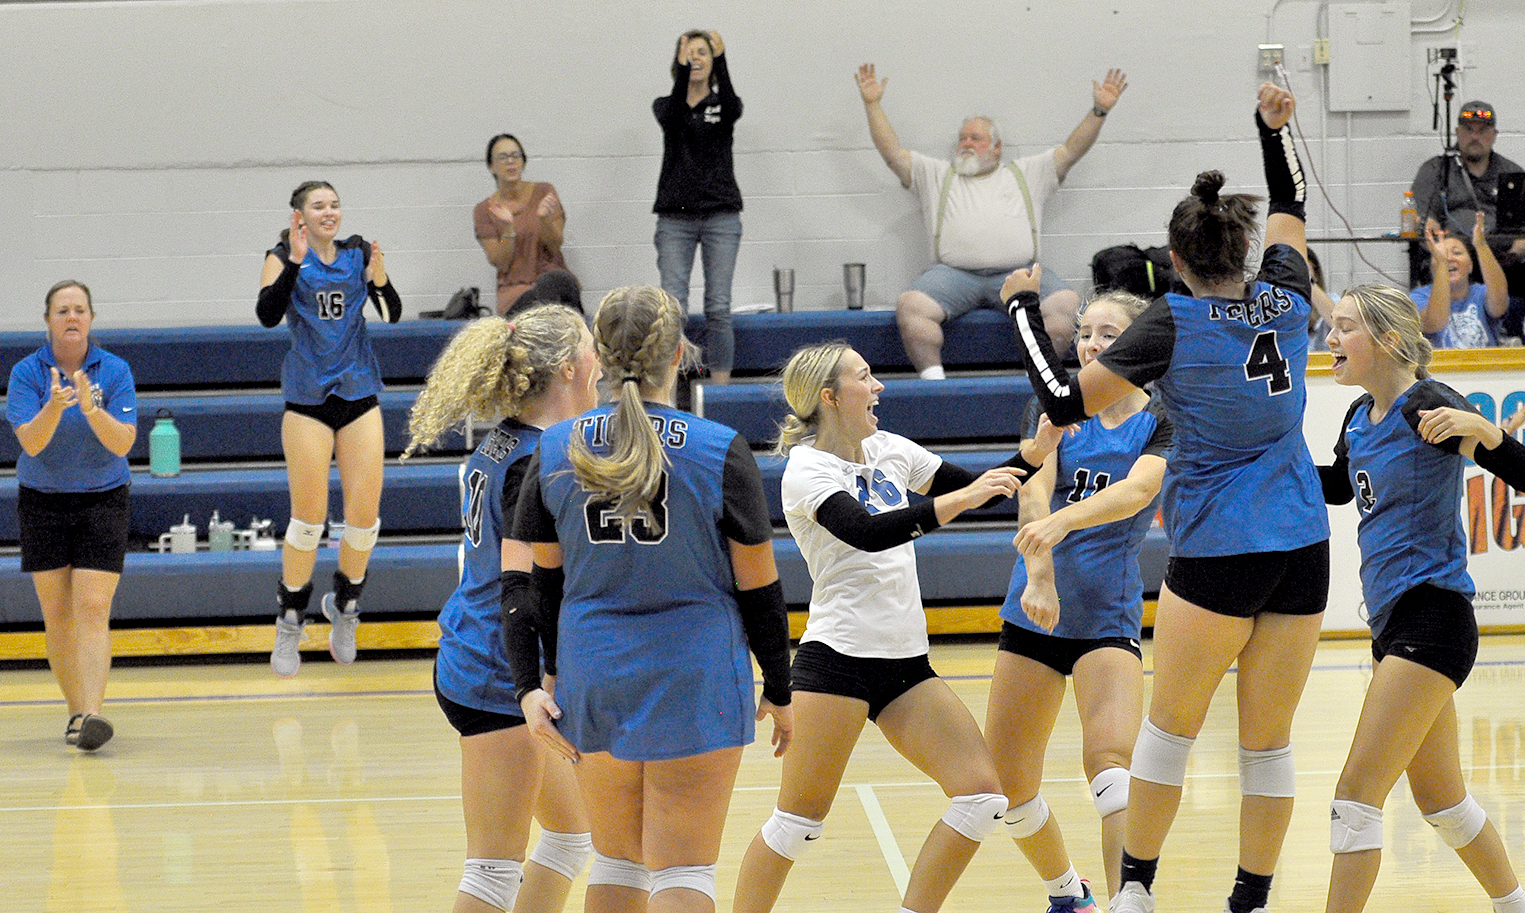 Jubilation all around after defeating Russell at the Stockton Volleyball Triangular on Sept. 12